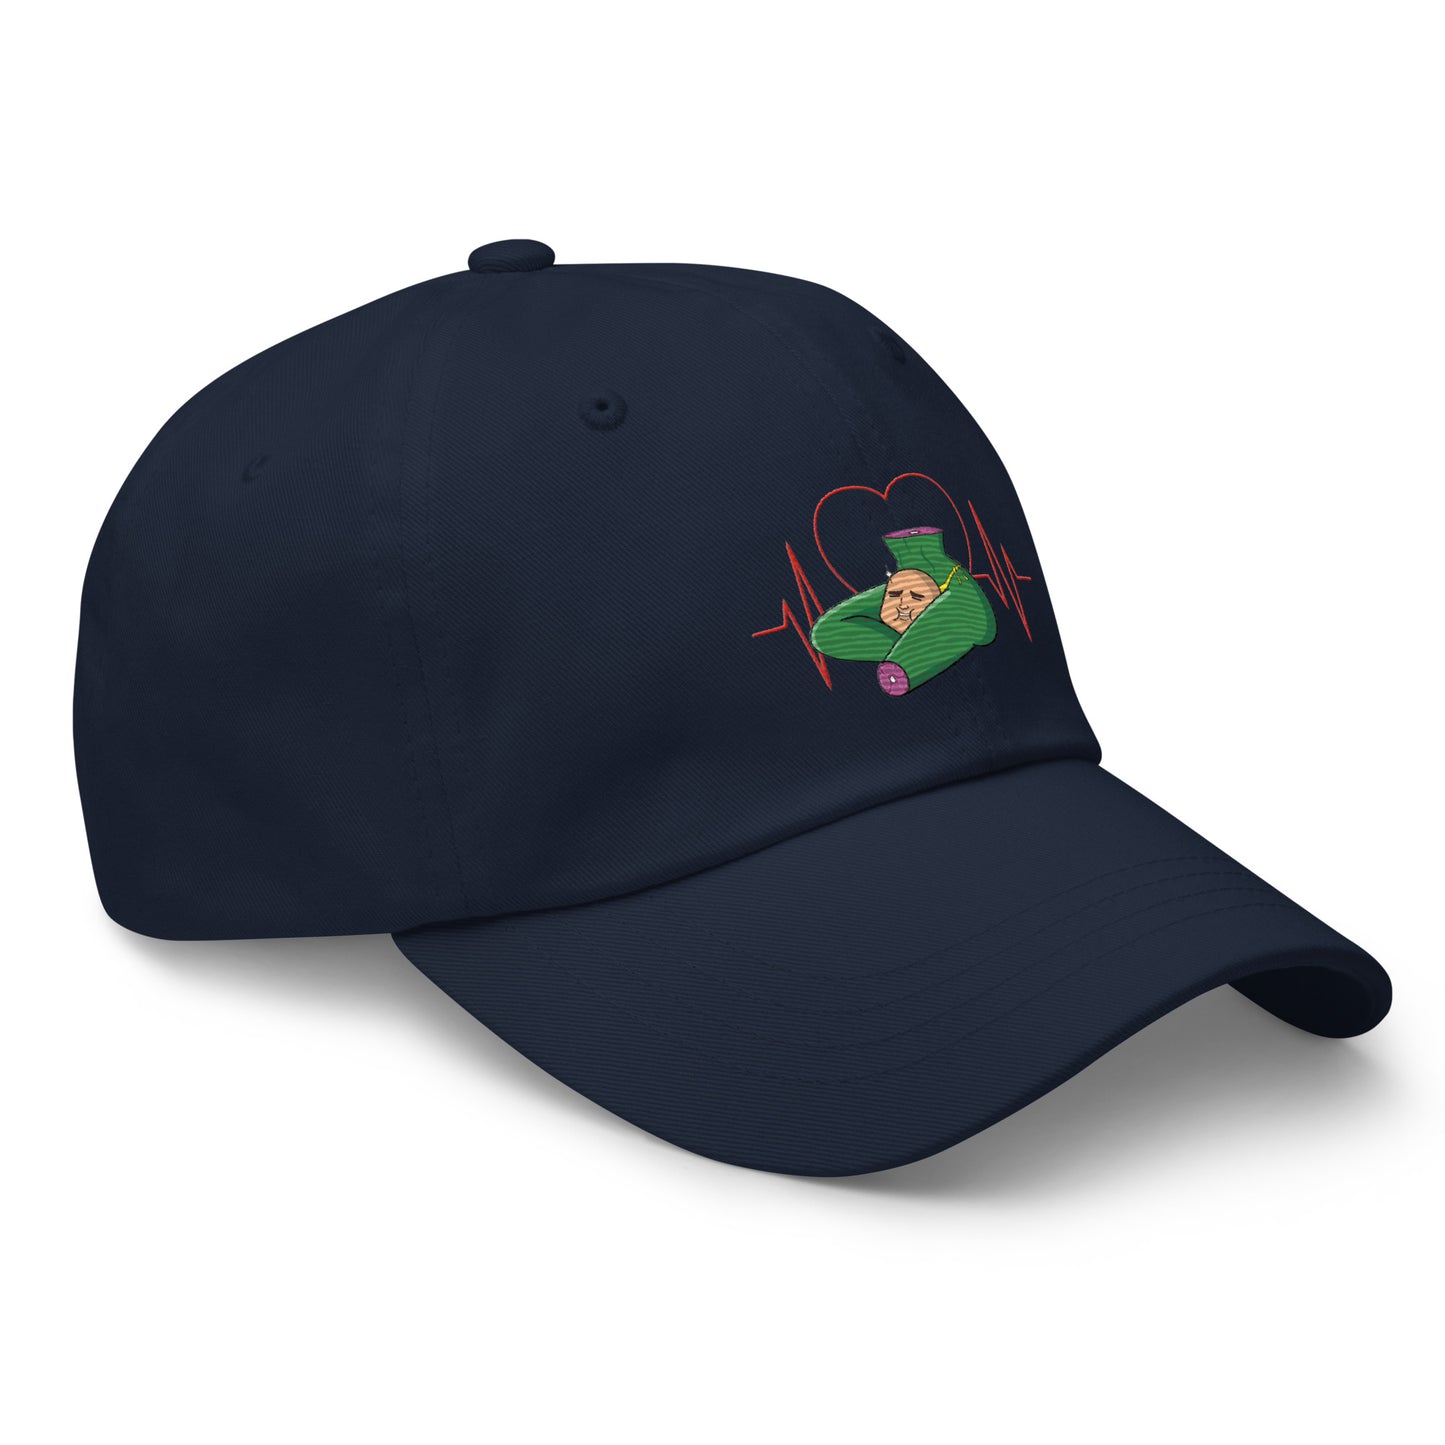 Zombie Thick Thighs Dad Hat